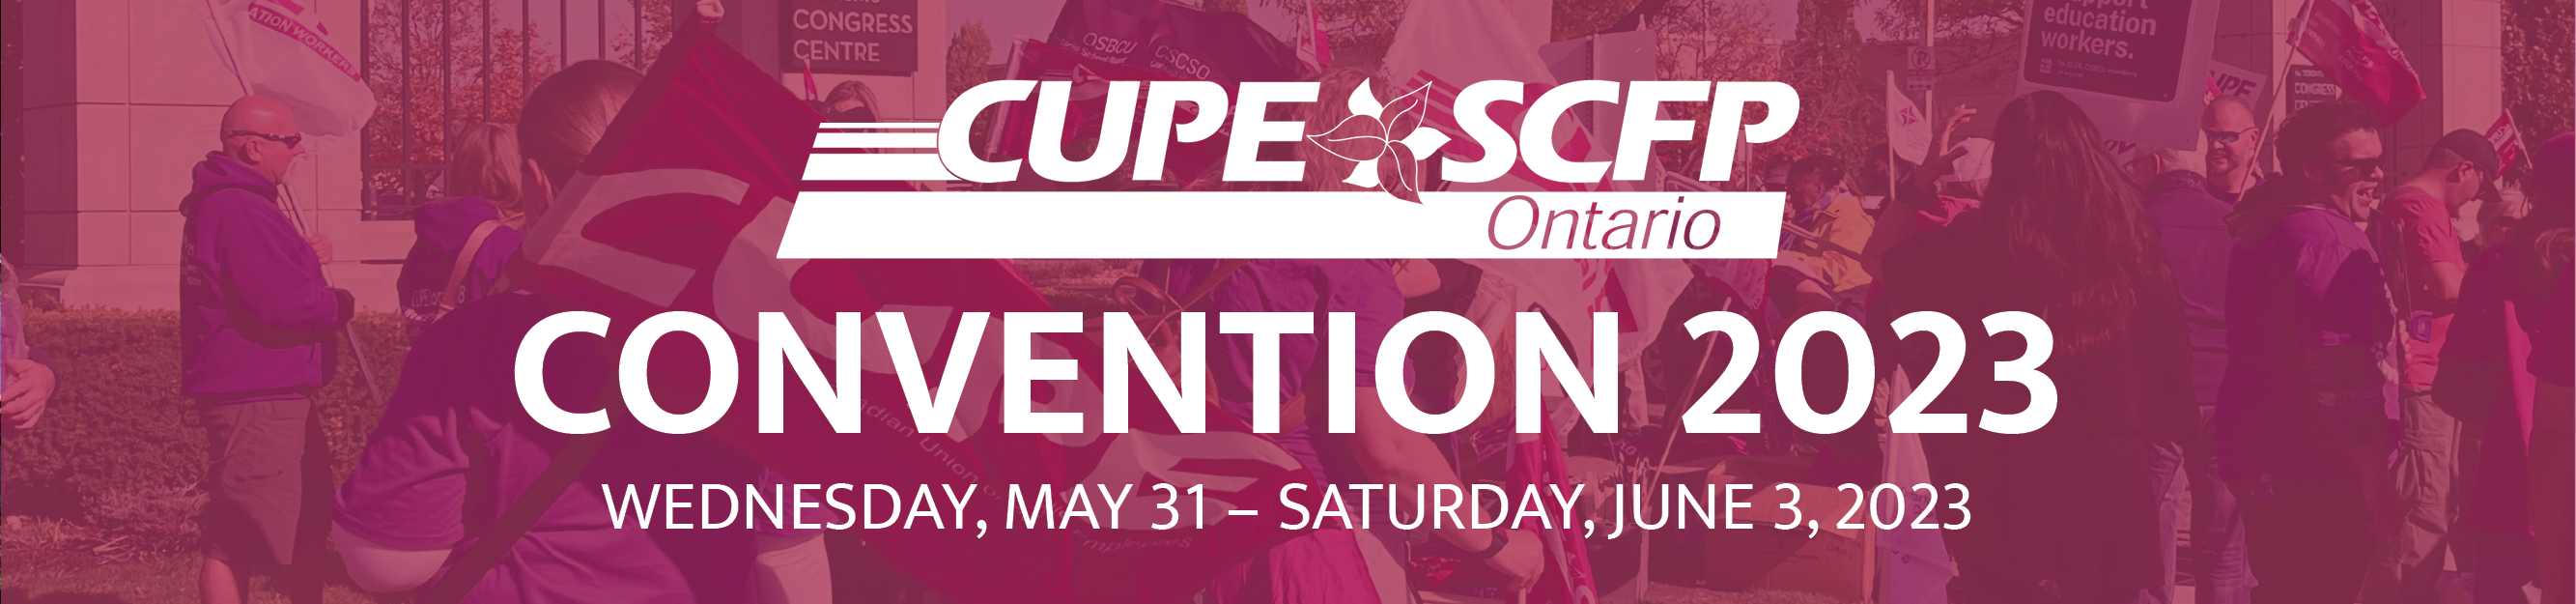 CUPE SCFP Ontario Convention 2023 Wednesday, May 31 - Saturday, June 3, 2023